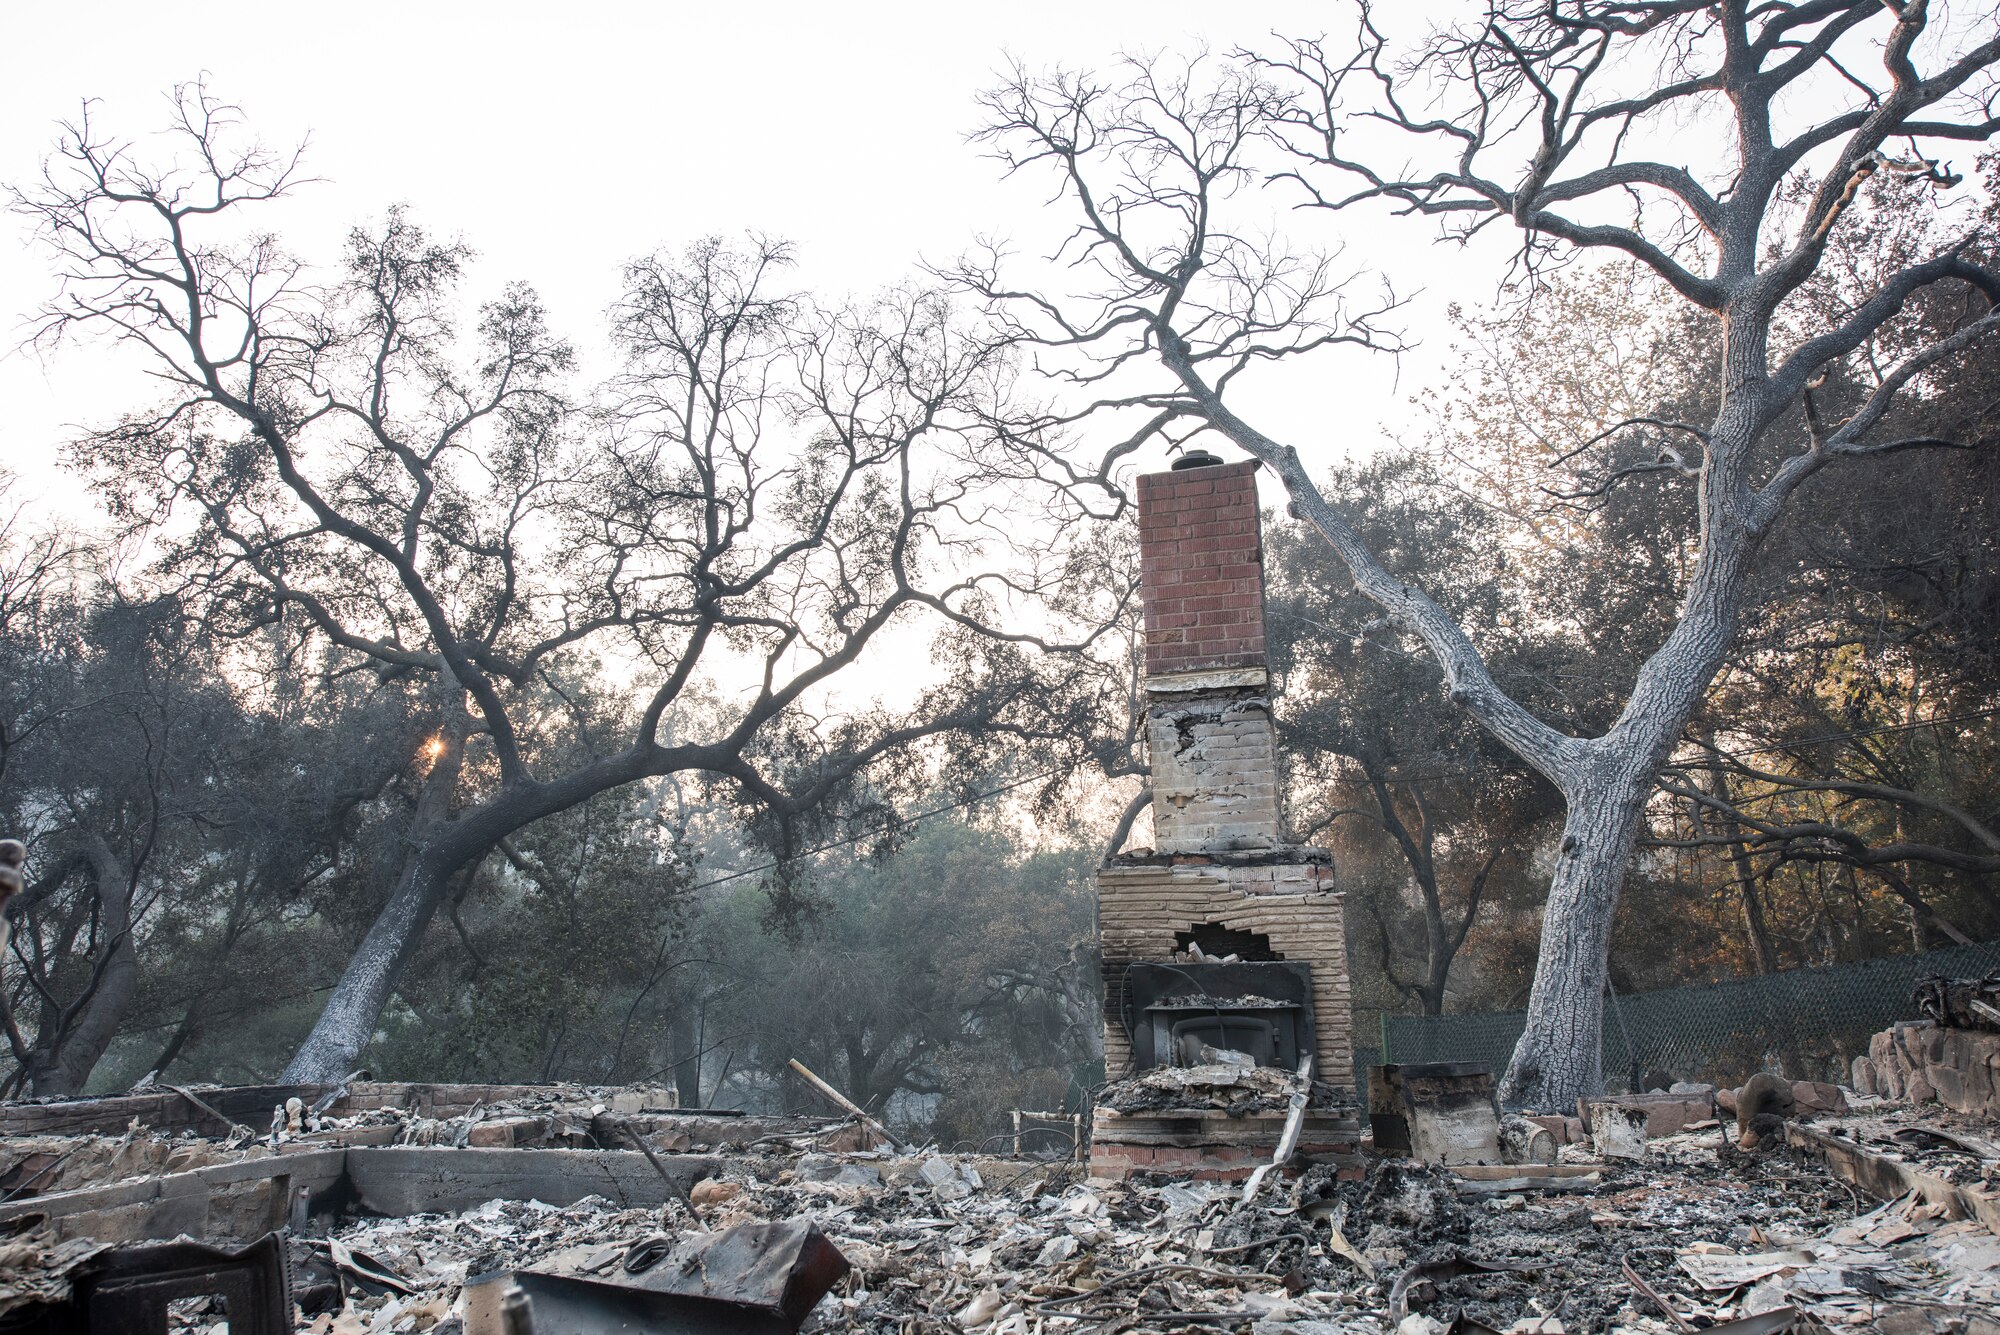 A chimney is all that stands of a home burned by the Thomas Fire. The fire started on Dec. 4, 2017 in Santa Paula, near Thomas Aquinas College. Driven by Santa Ana winds gusting up to 70 mph, the flames screamed across the hillsides toward Ojai, Ventura and Santa Barbara. The 146 Airlift Wing was activated Dec.5, 2017, to support CAL FIRE with wildfire suppression efforts within the state. (U.S. Air Force photo/Master Sgt. Brian Ferguson)